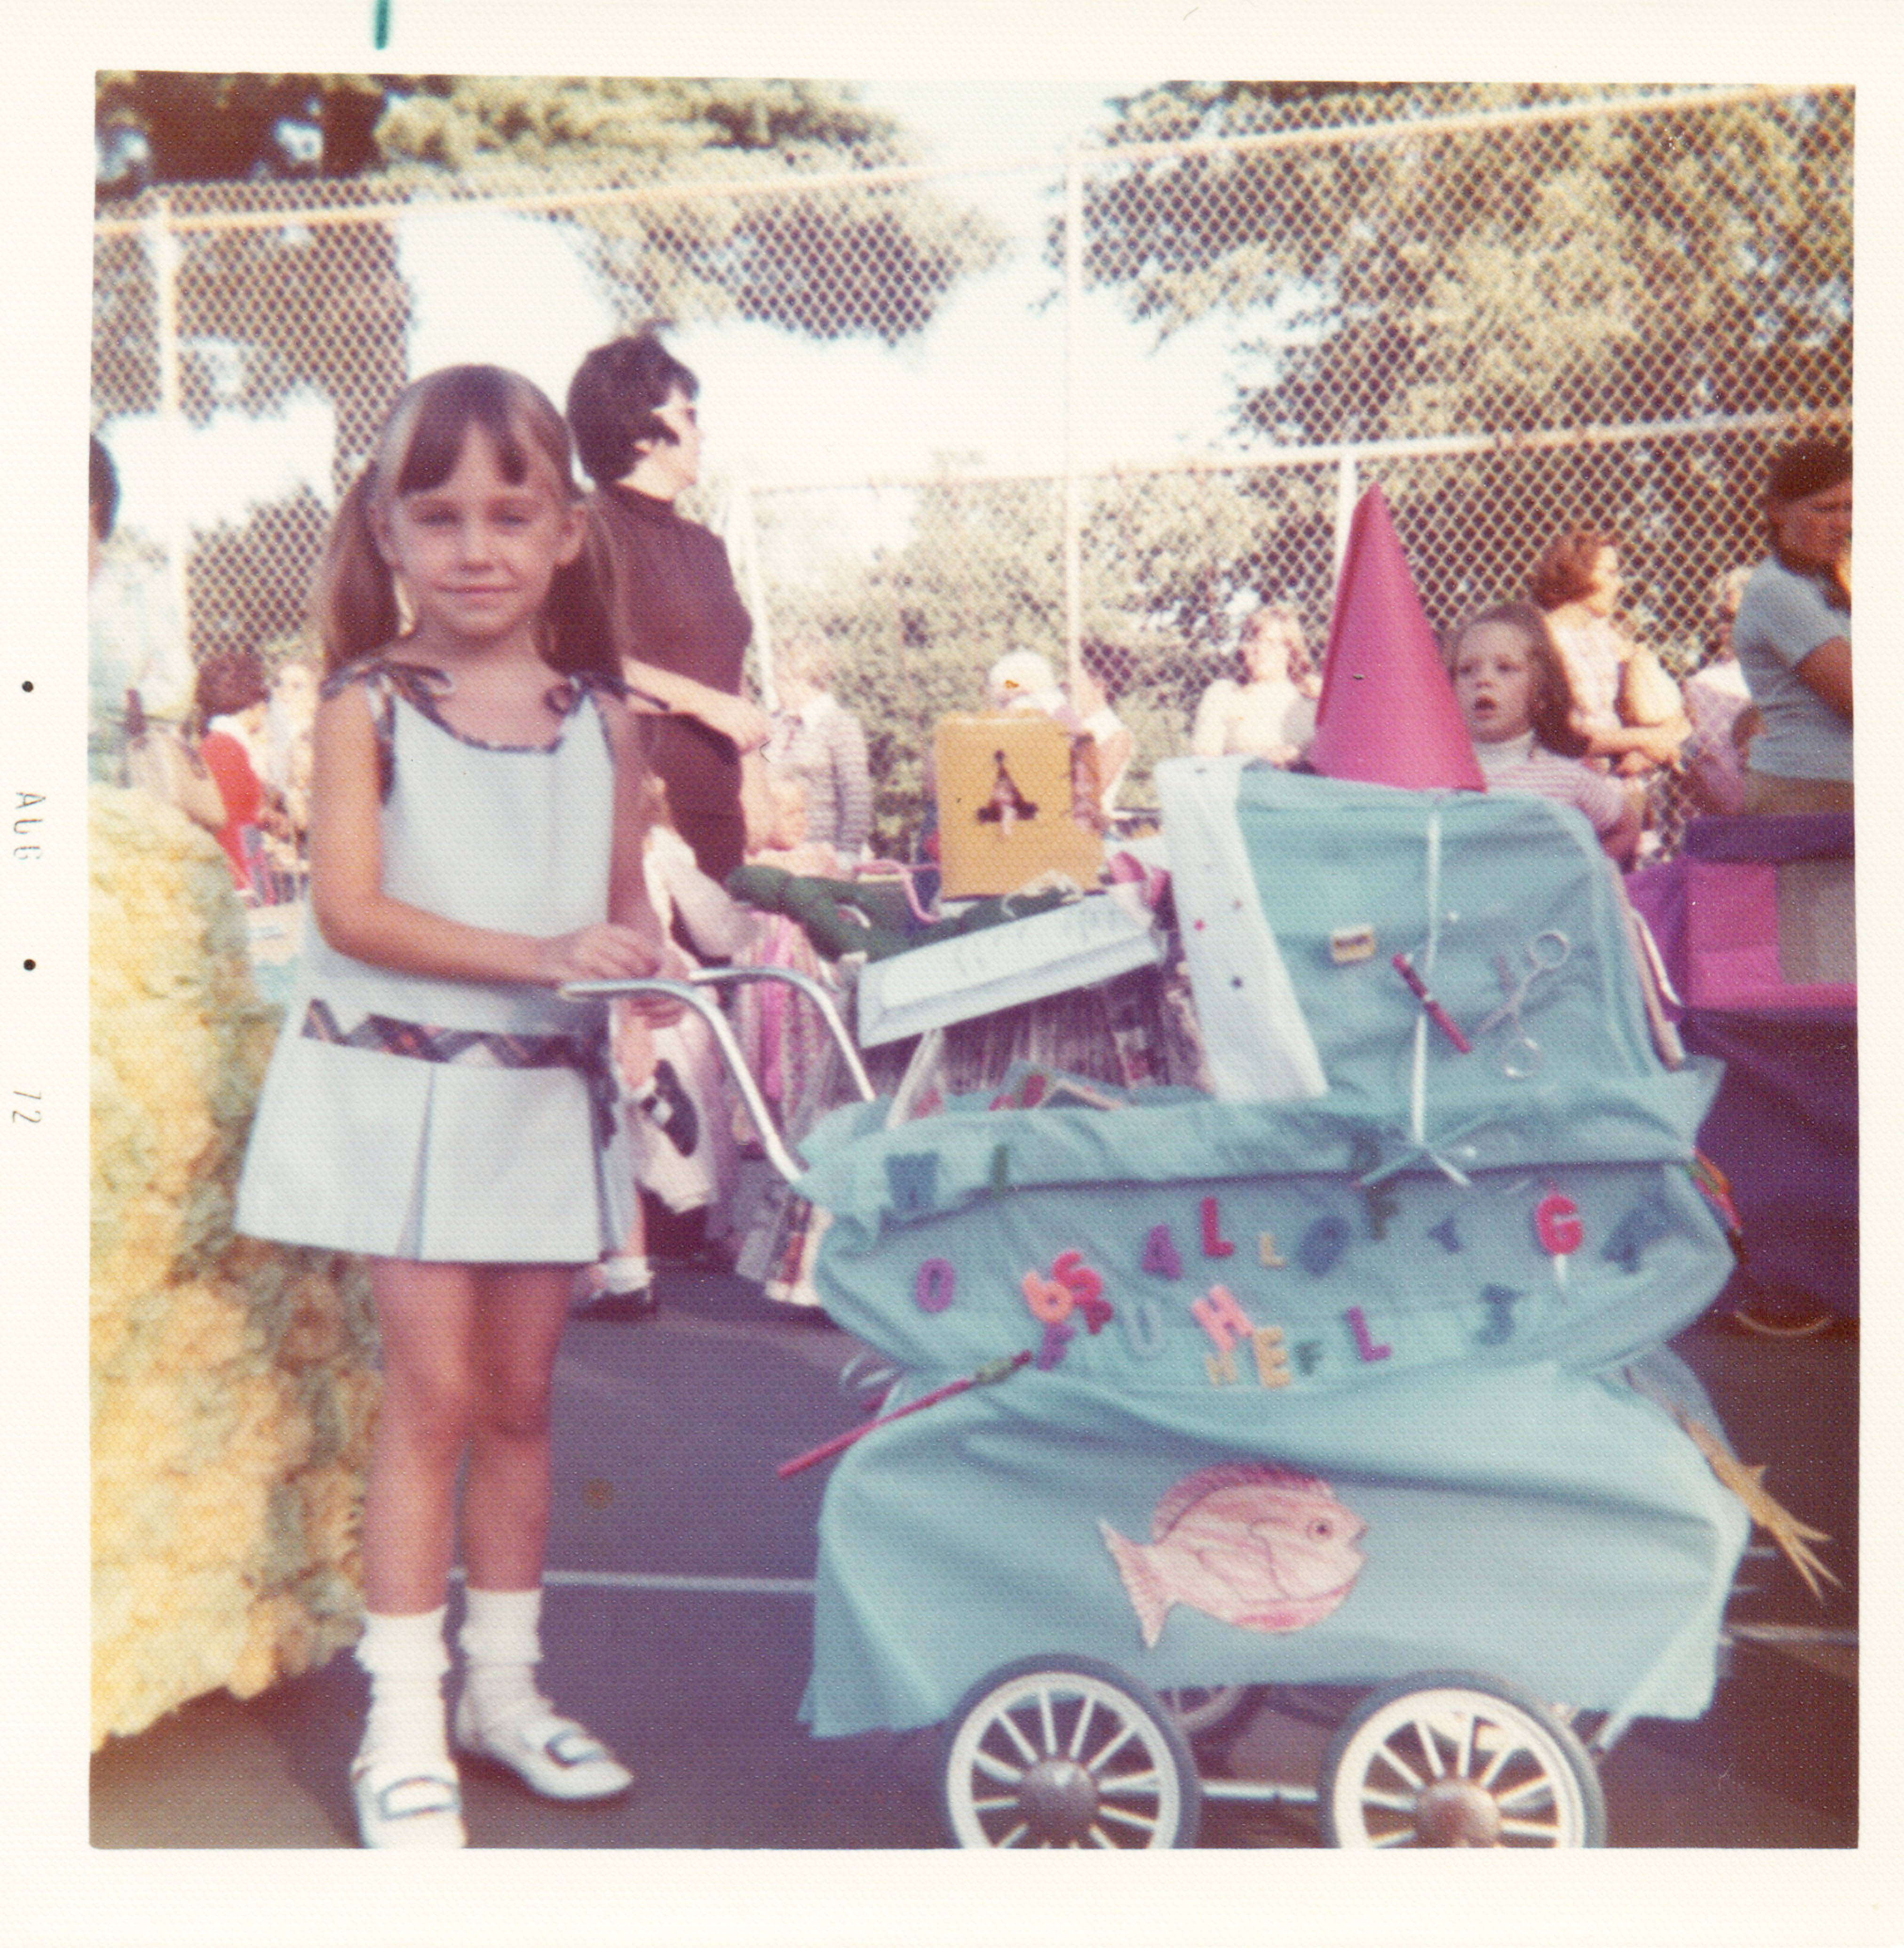 A photo of a girl with a decorated doll carriage.